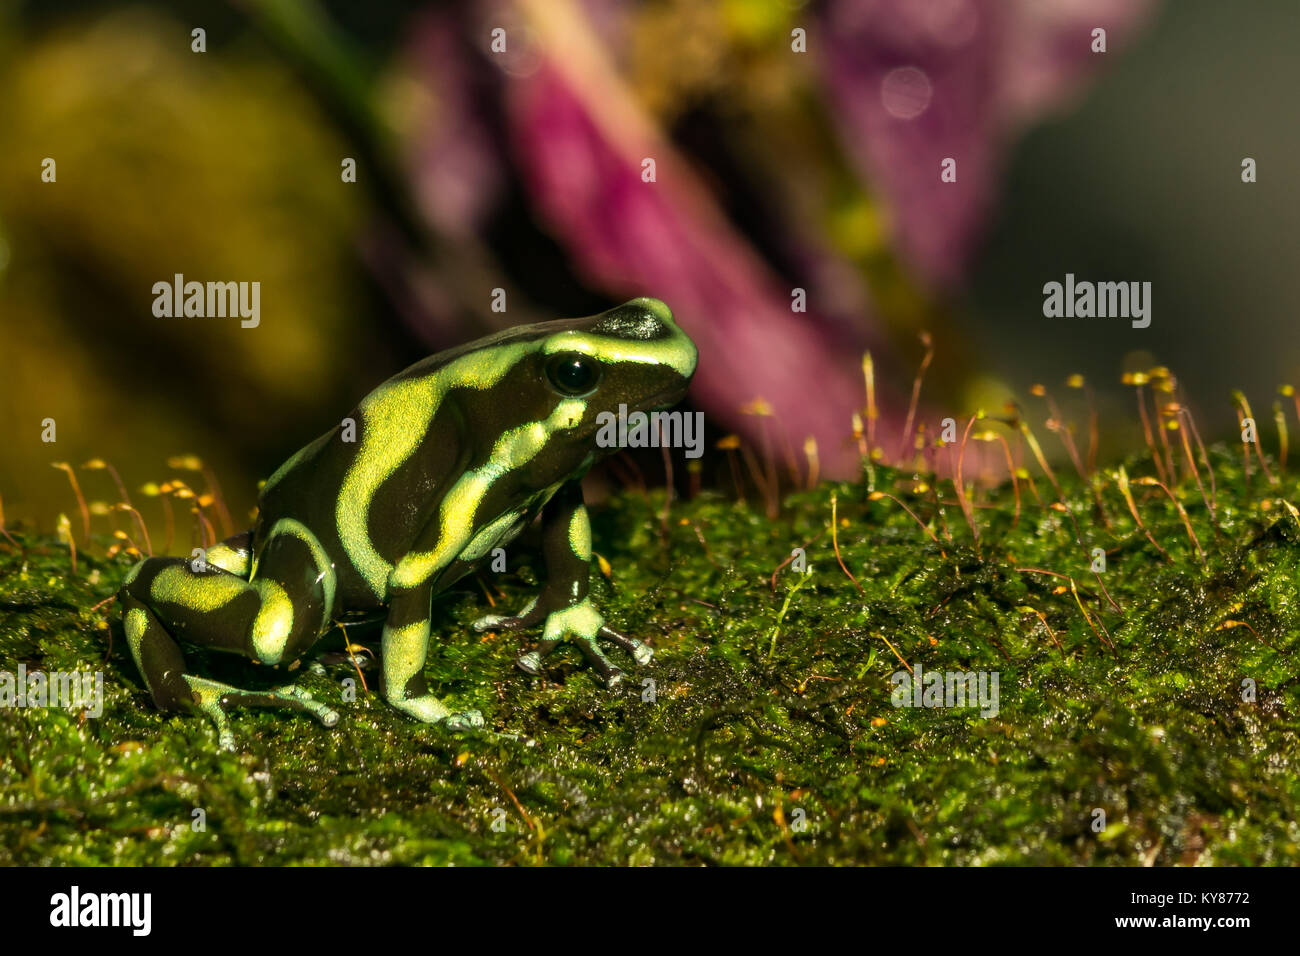 Green and Black Poison Dart Frog Stock Photo